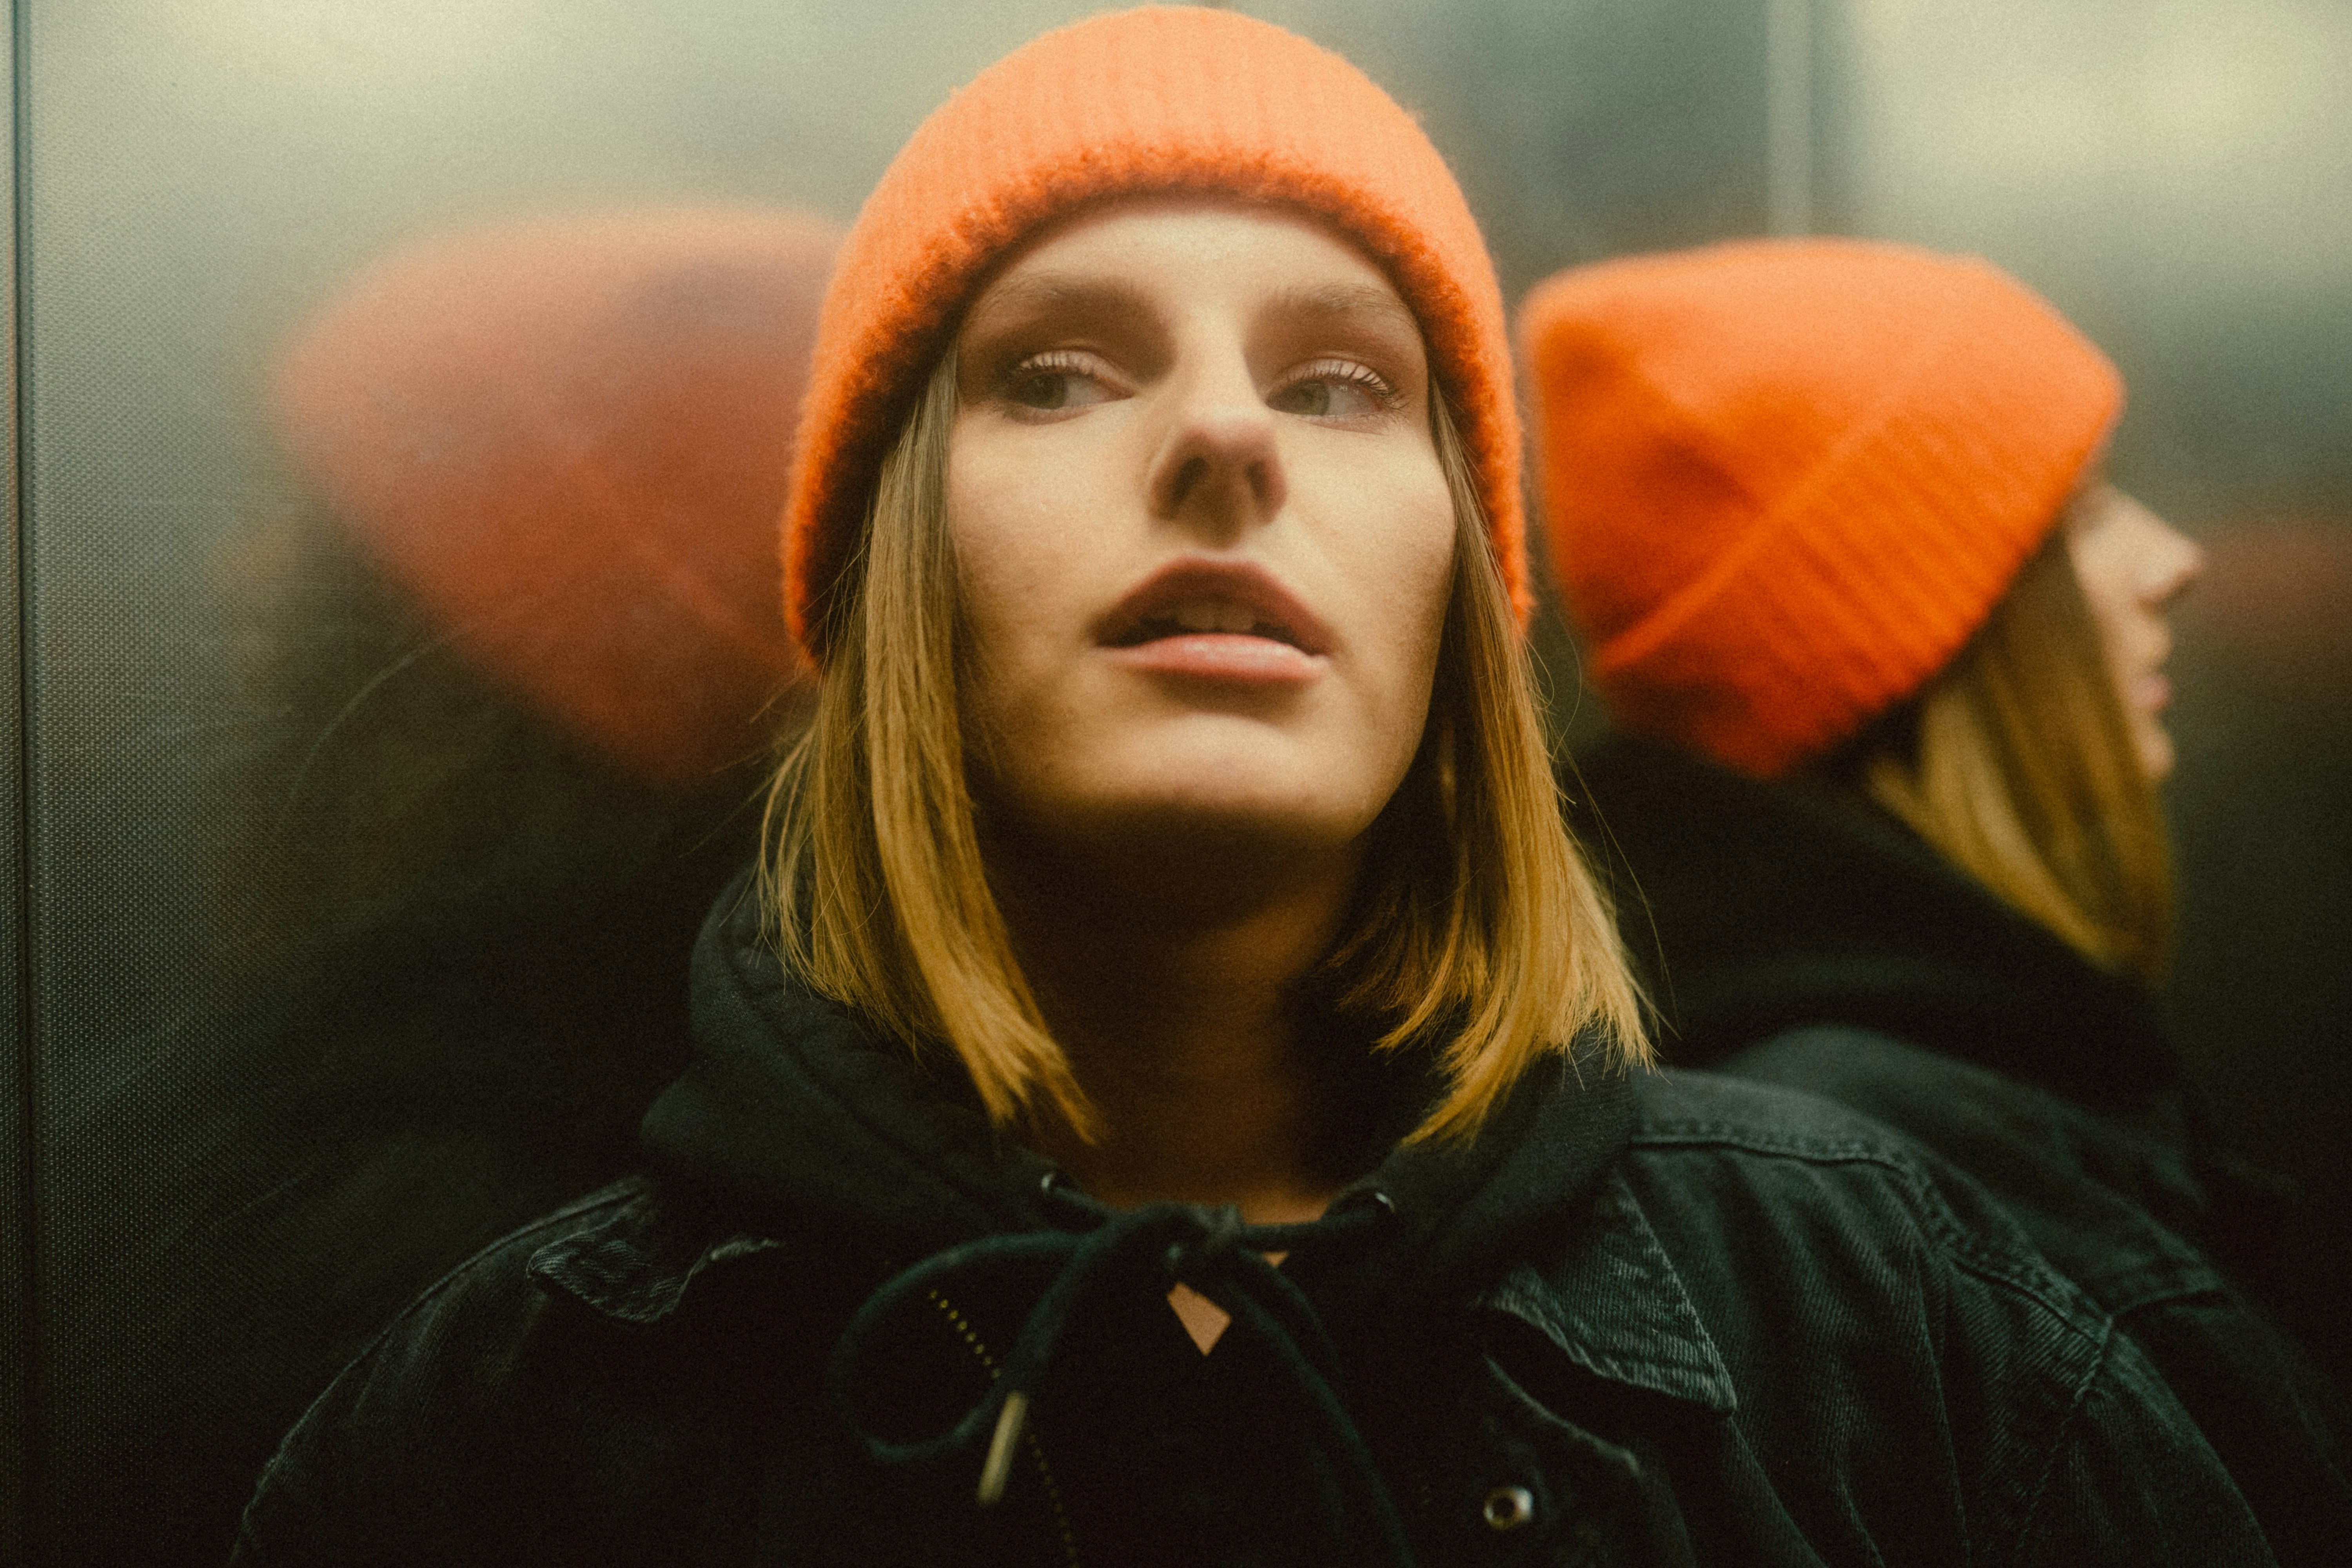 woman in black jacket and orange knit cap